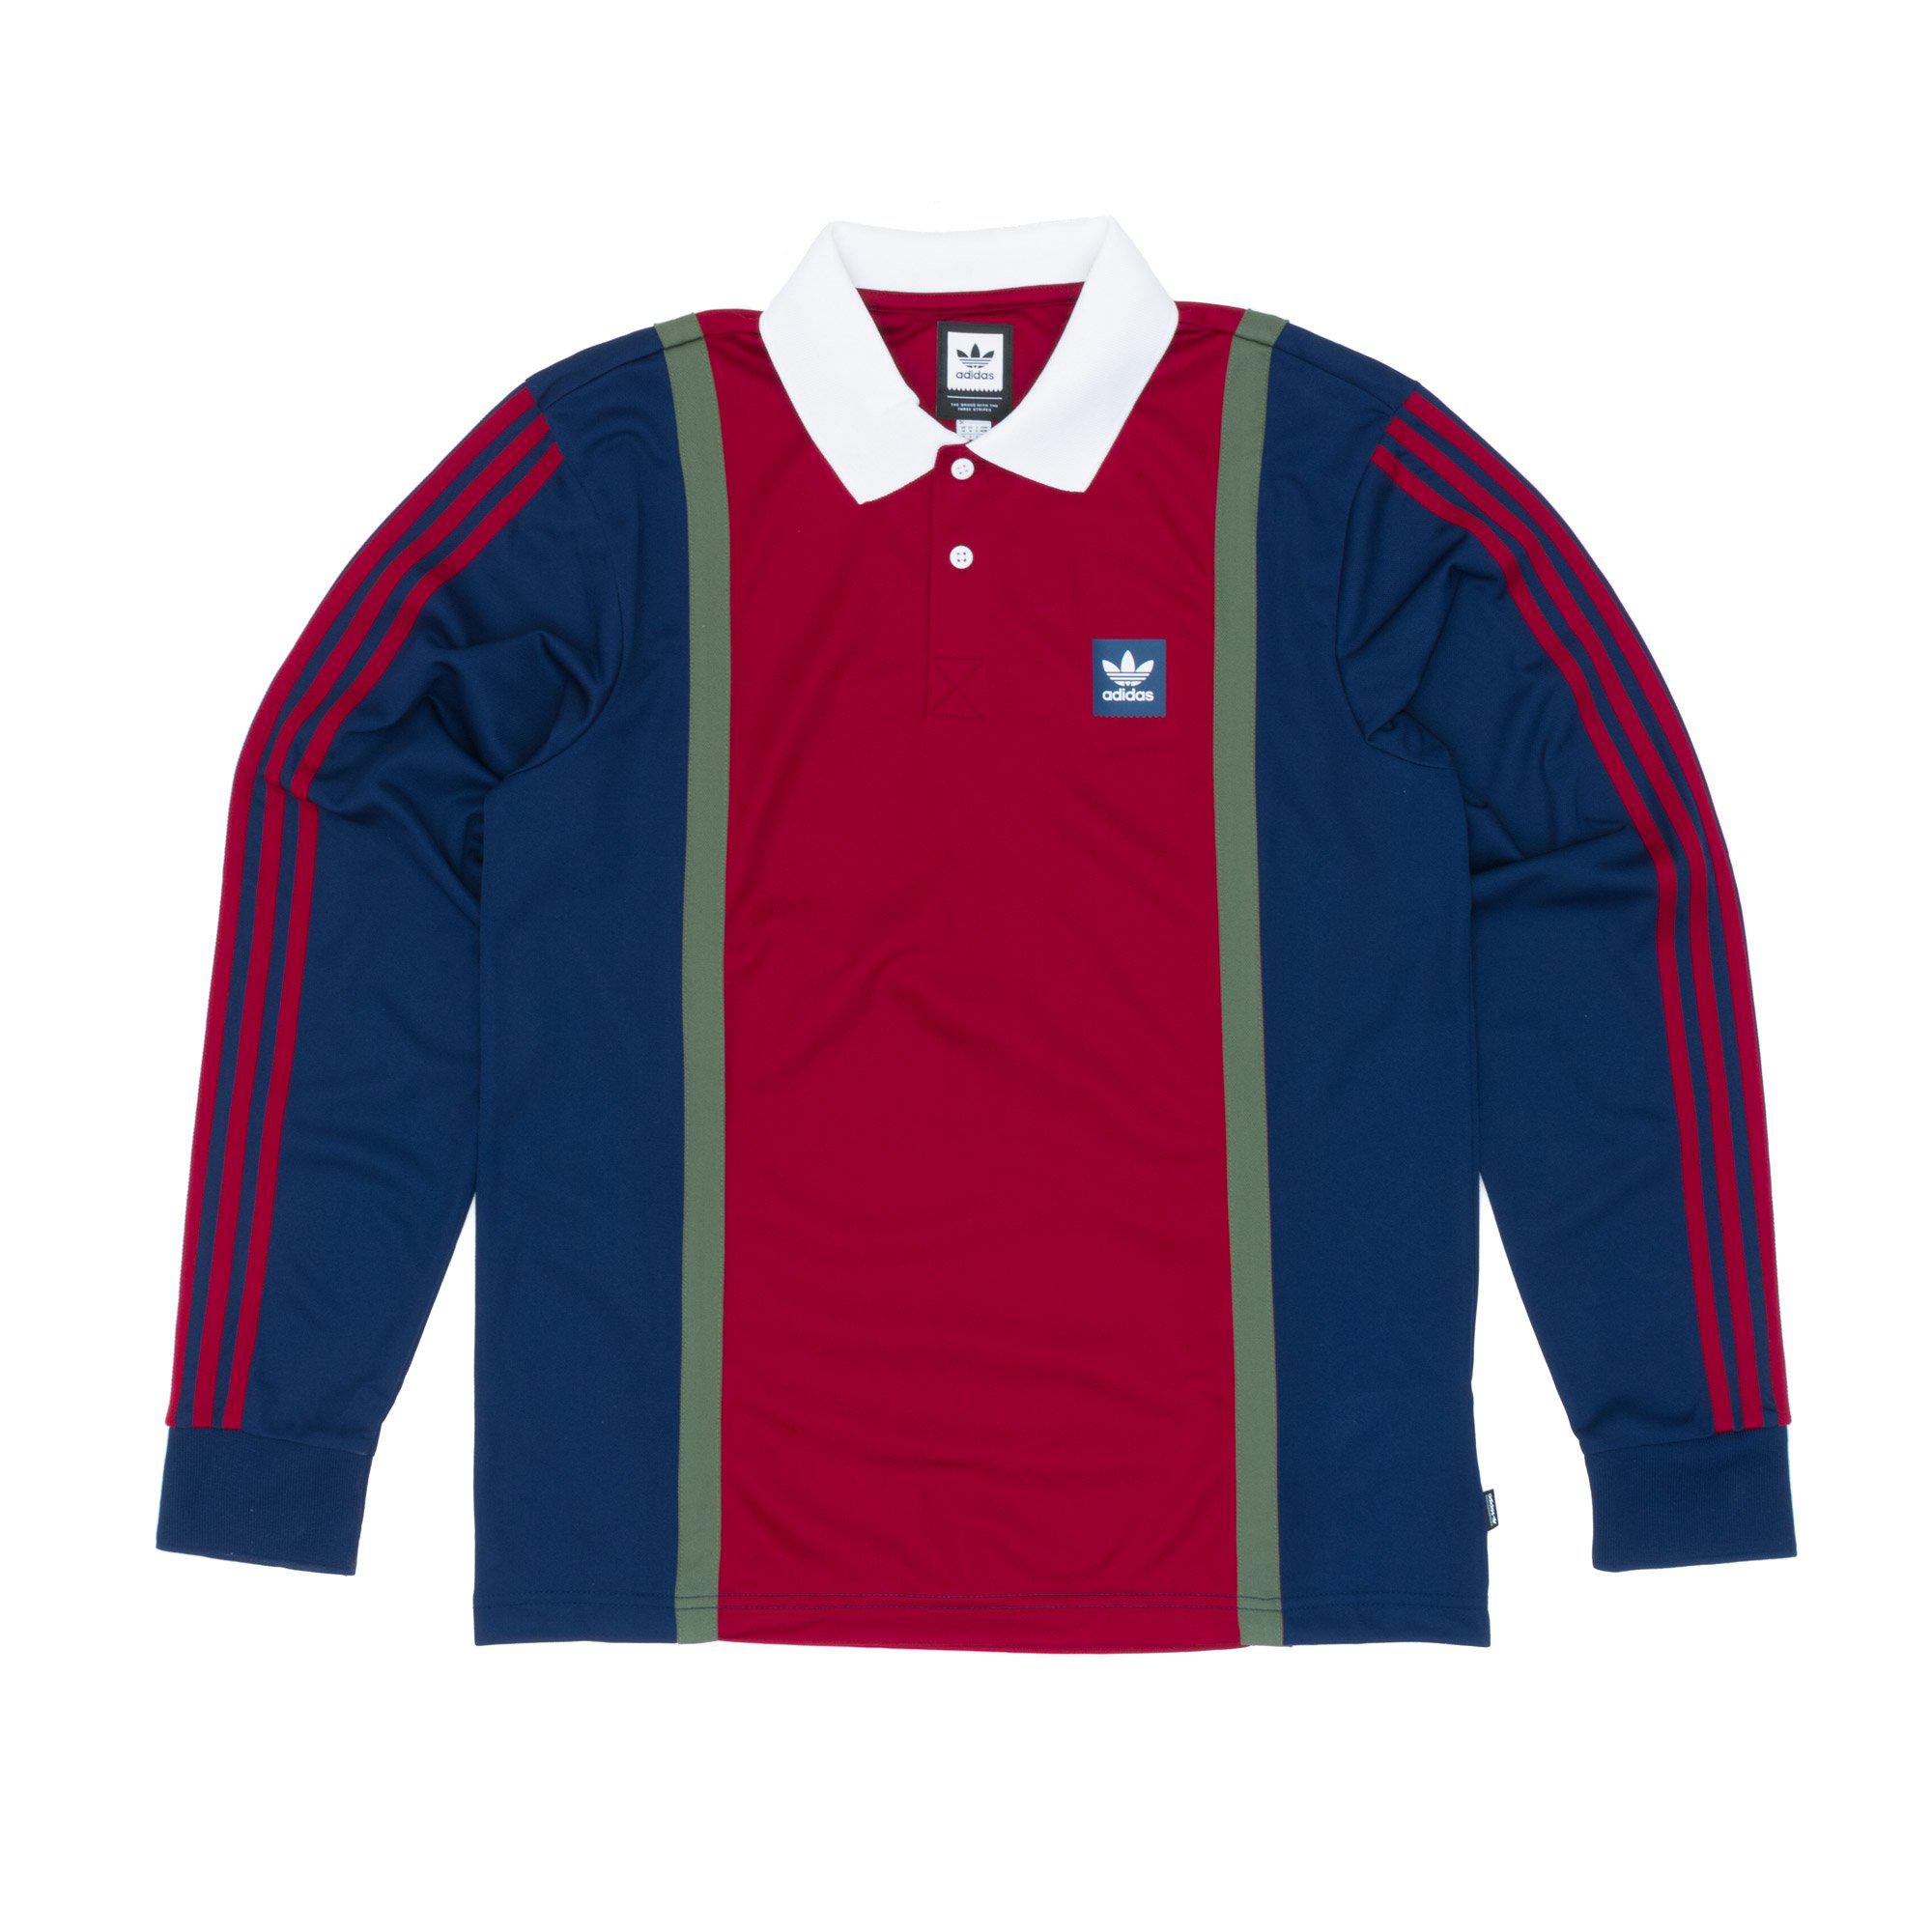 adidas Rugby Jersey in Burgundy (Blue 